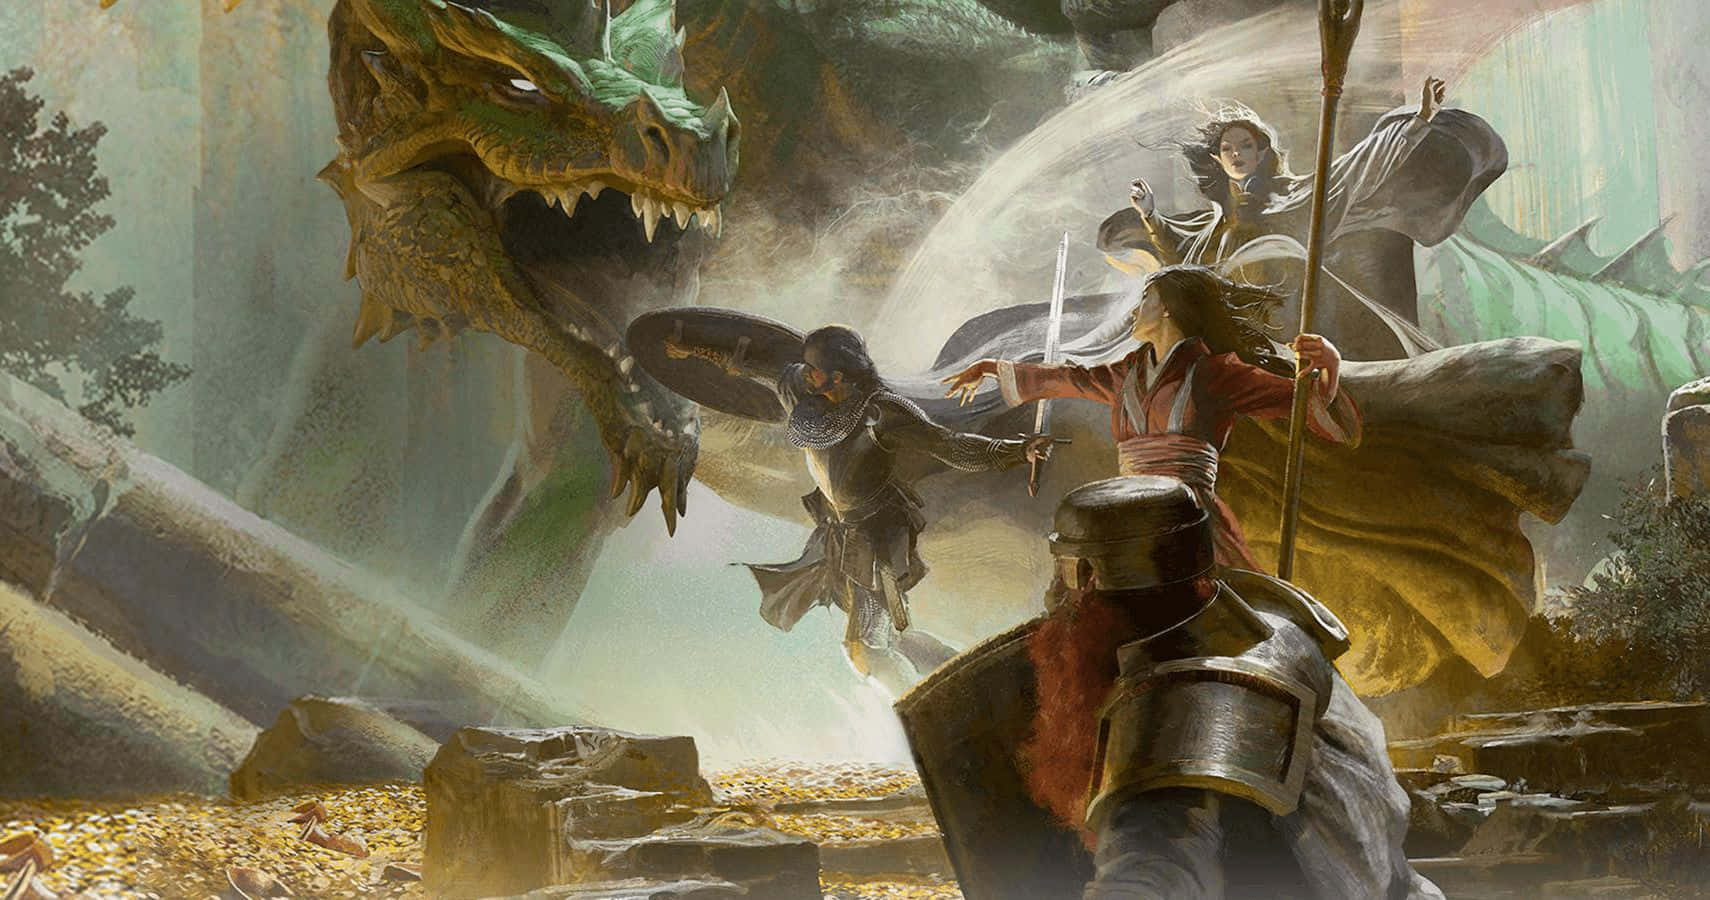 A Painting Of A Man And A Dragon